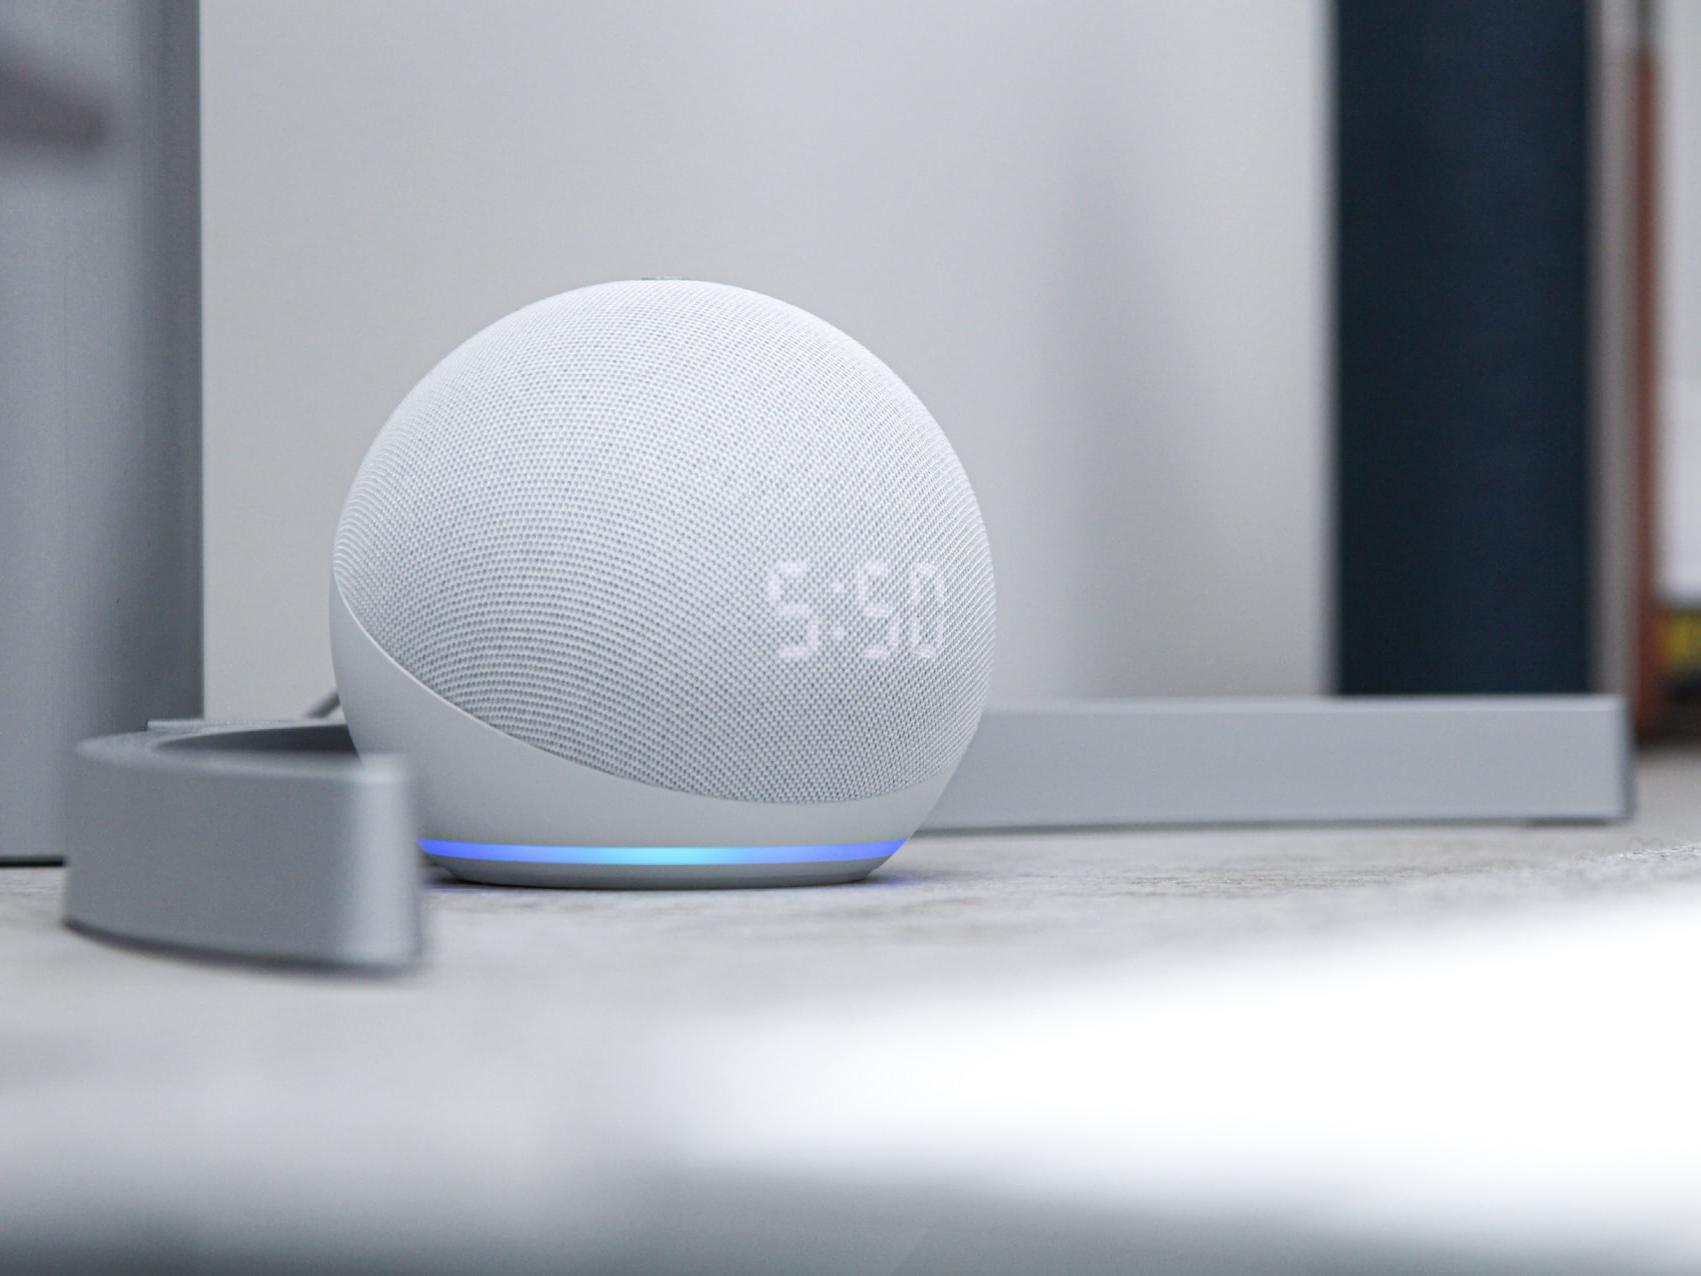 People open up more to smart speakers that listen actively 